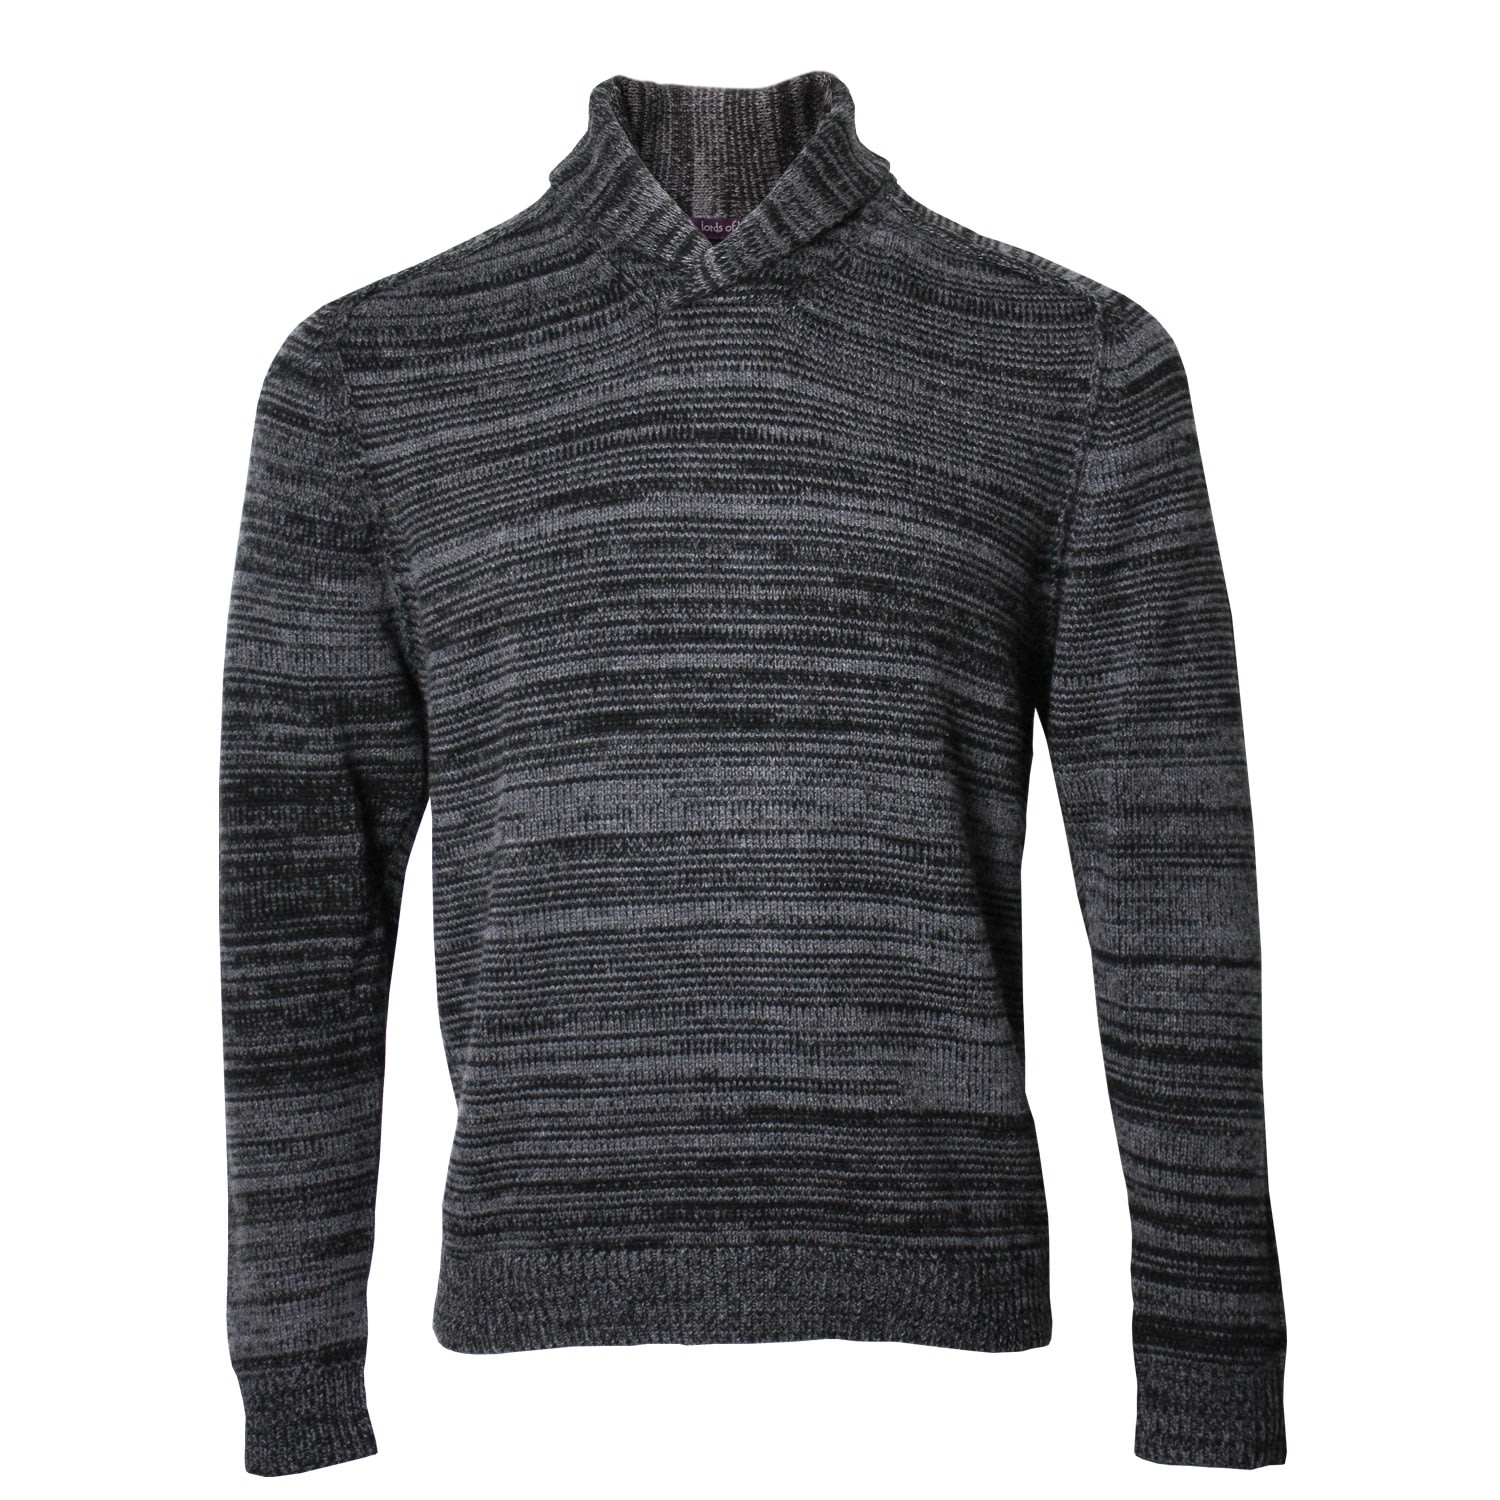 Men’s Black / Grey Sweet Shawl Neck Sweater In Charcoal Large Lords of Harlech